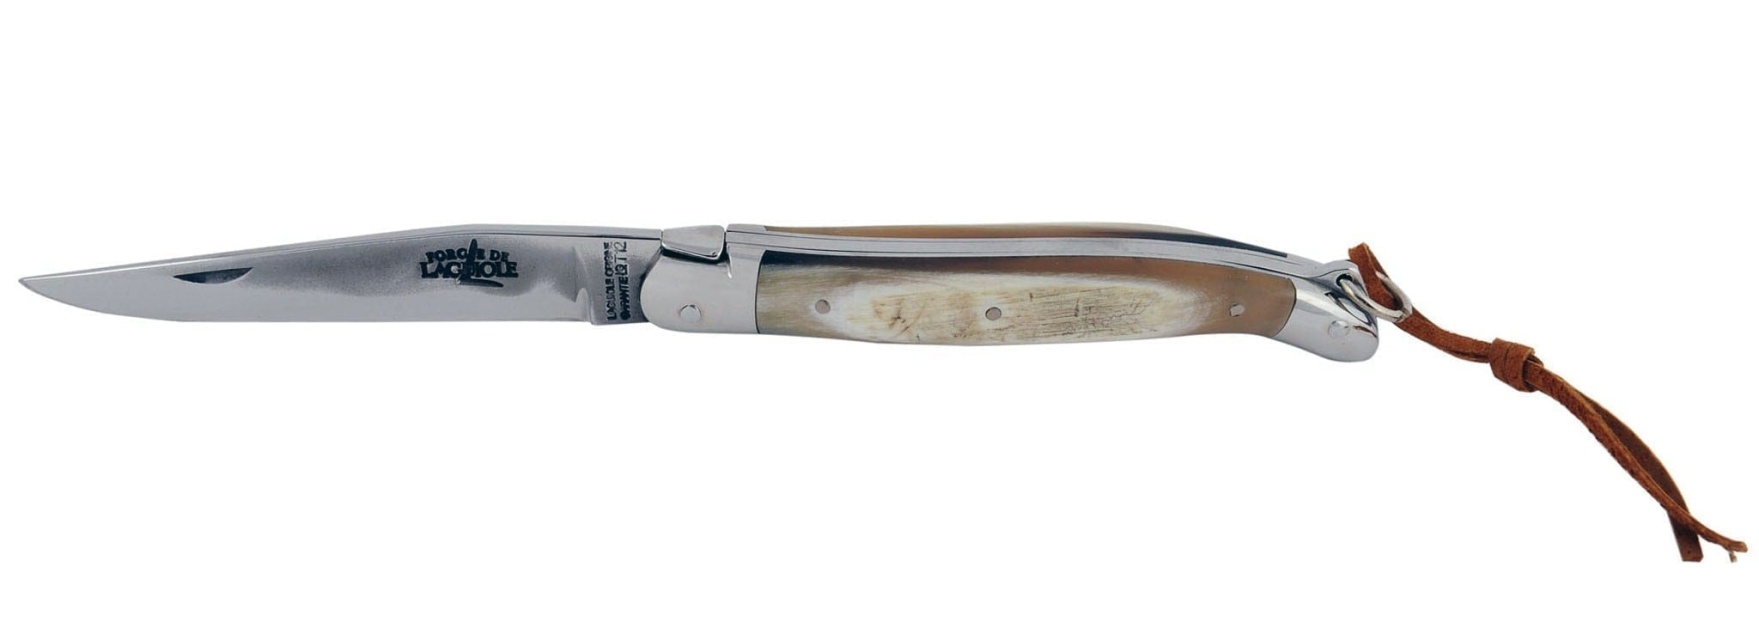 Food knife with folding blade - handle in cow horn